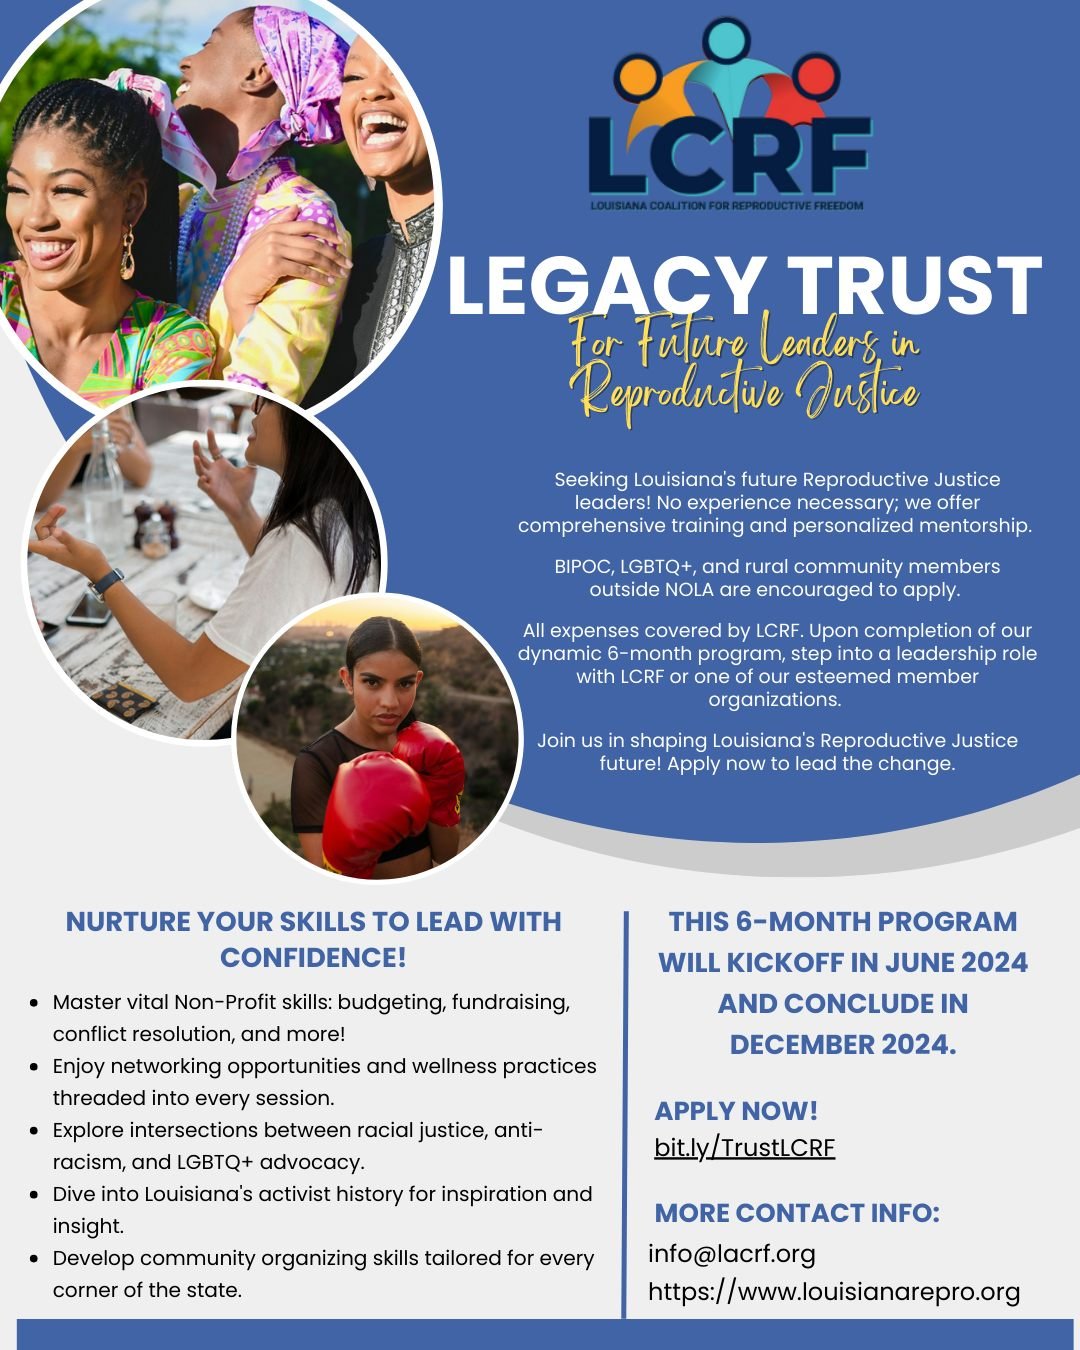 DID YOU KNOW? Applications to the Legacy Trust close May 24. Emerging leaders will gain skills and relationships need to become repro leaders! Apply today and pass it on!